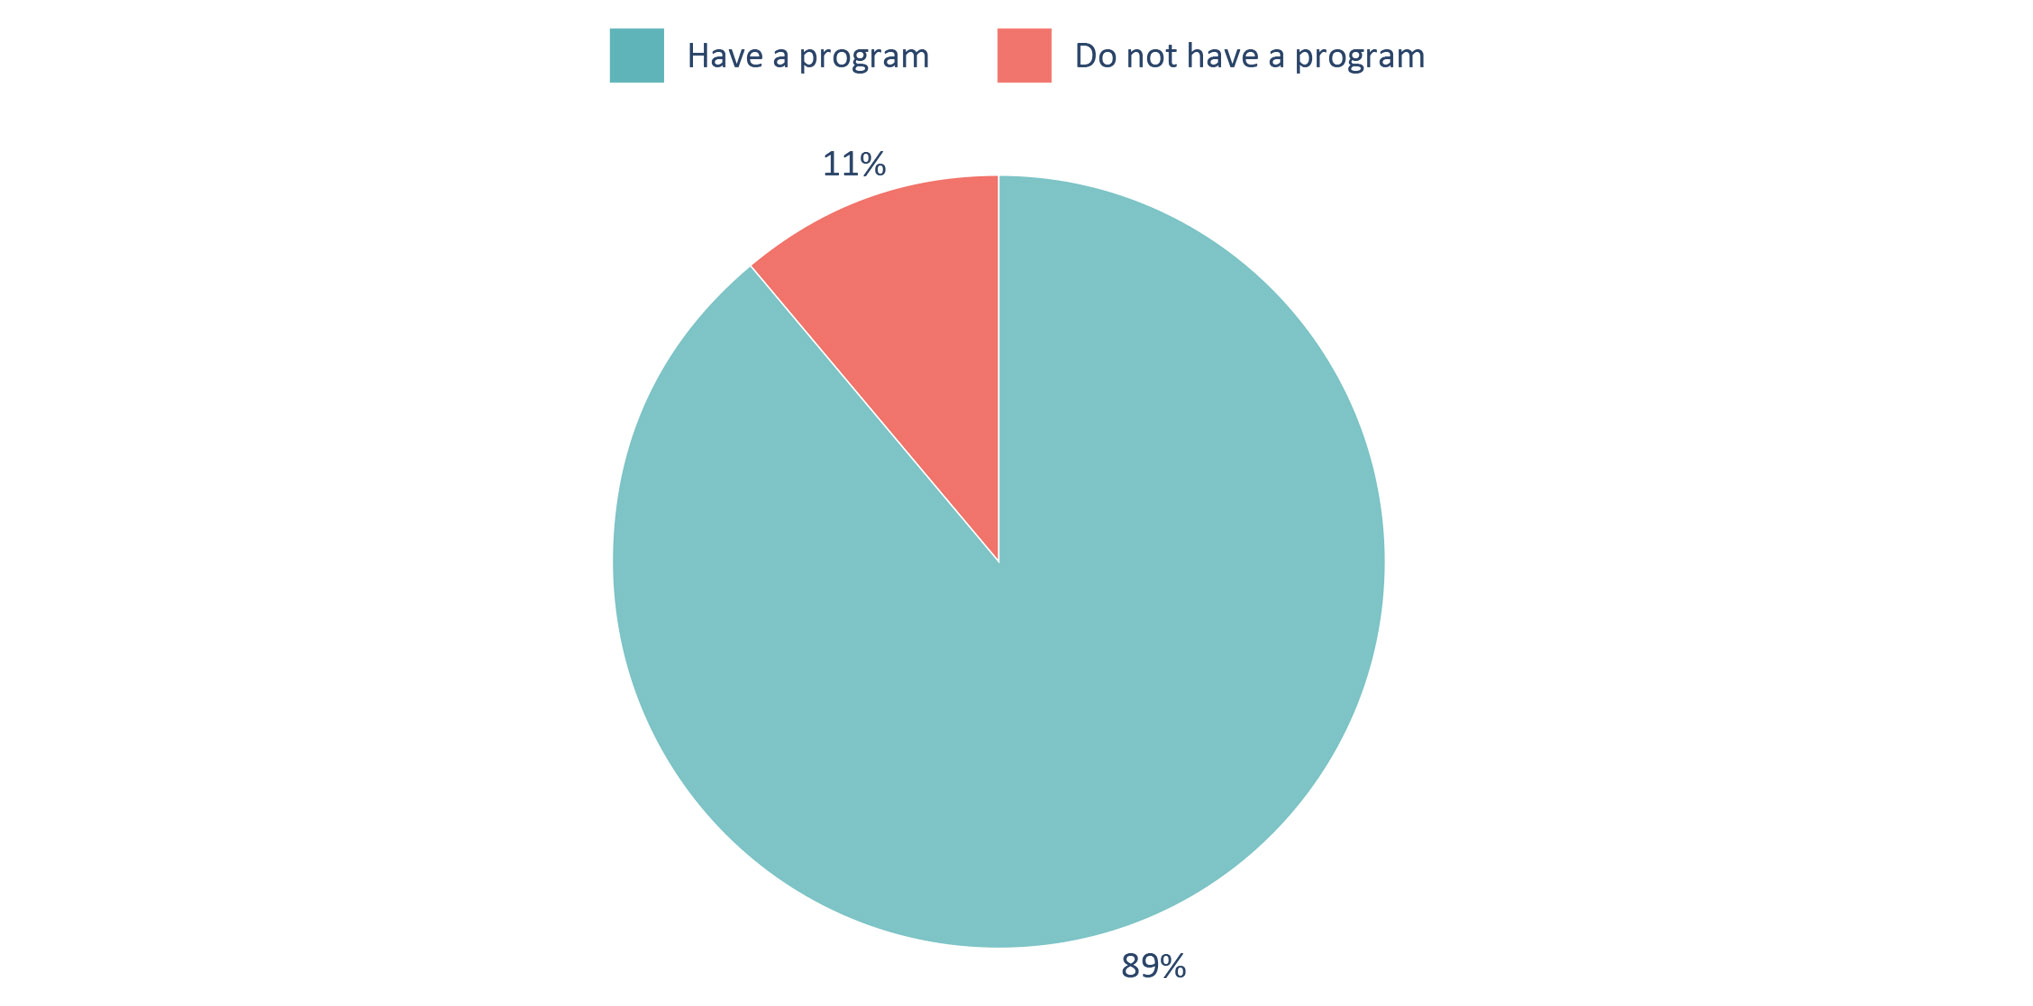 Figure 1. Eighty-nine percent of districts reported having some type of gifted or advanced programming for elementary or middle school students.